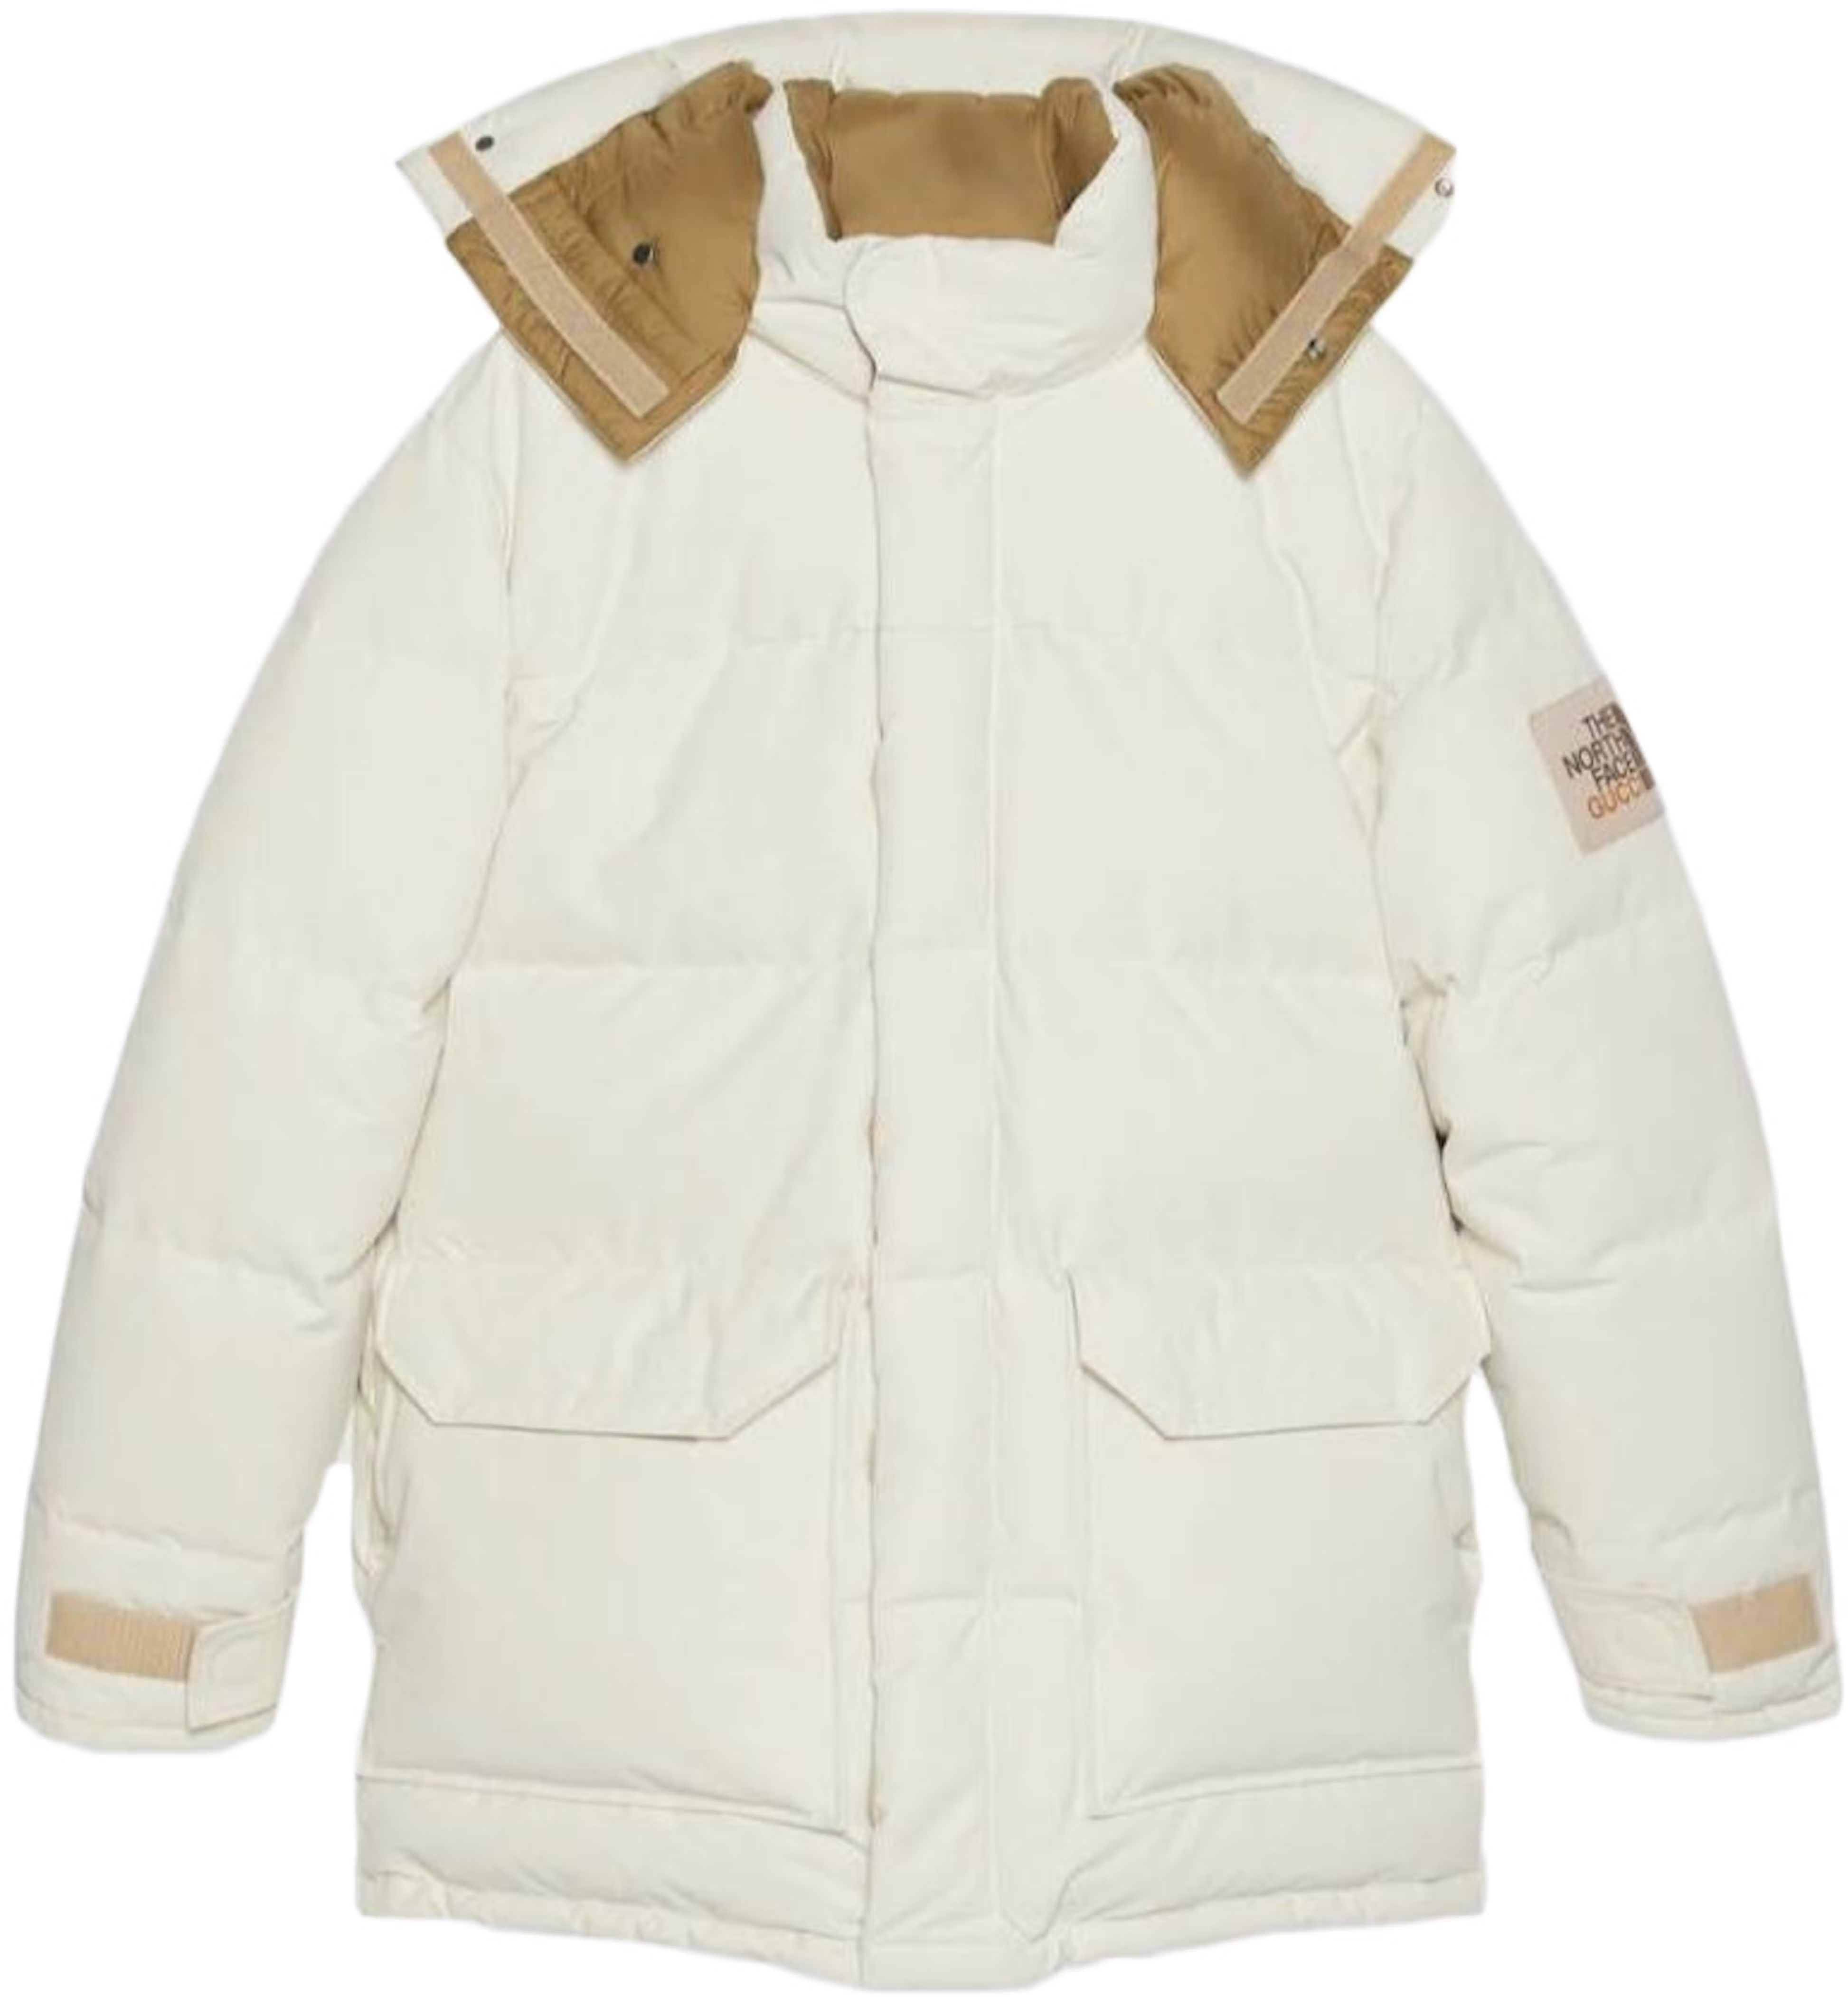 Gucci x The North Face Puffer Jacket Cream THE GARDEN